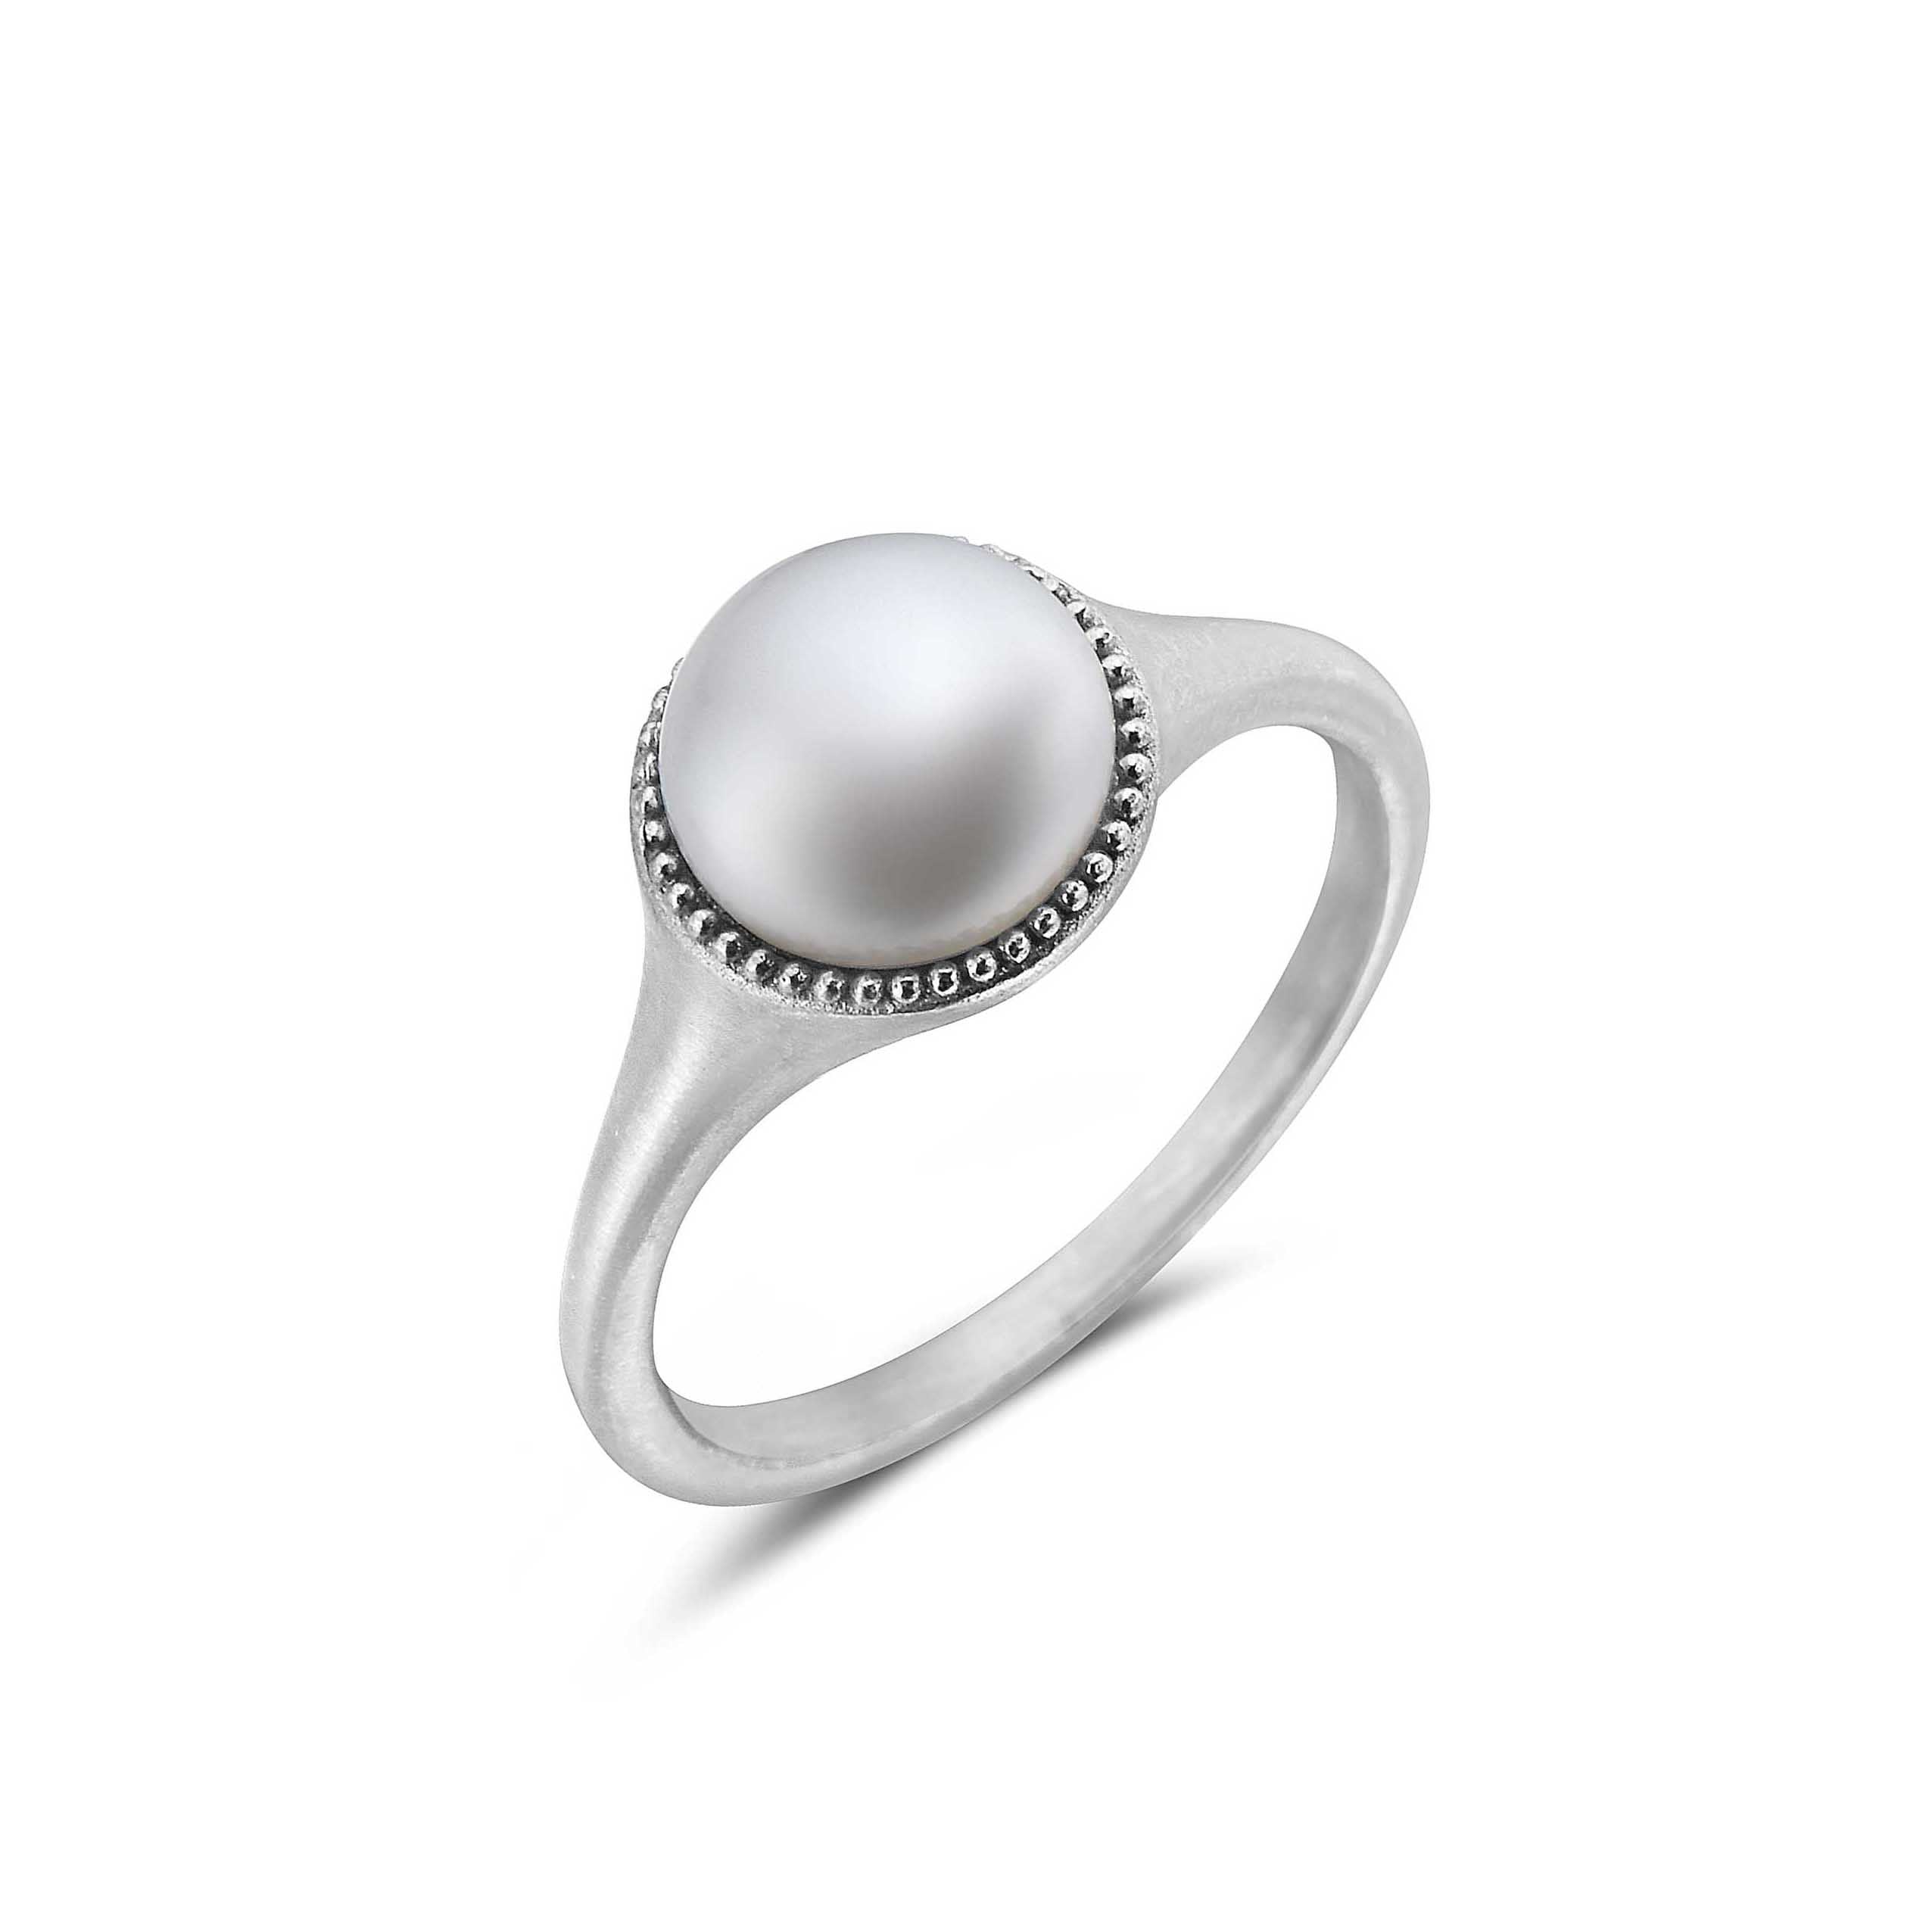 Sterling Silver and Cultured Pearl Cocktail Ring - White Frangipani | NOVICA